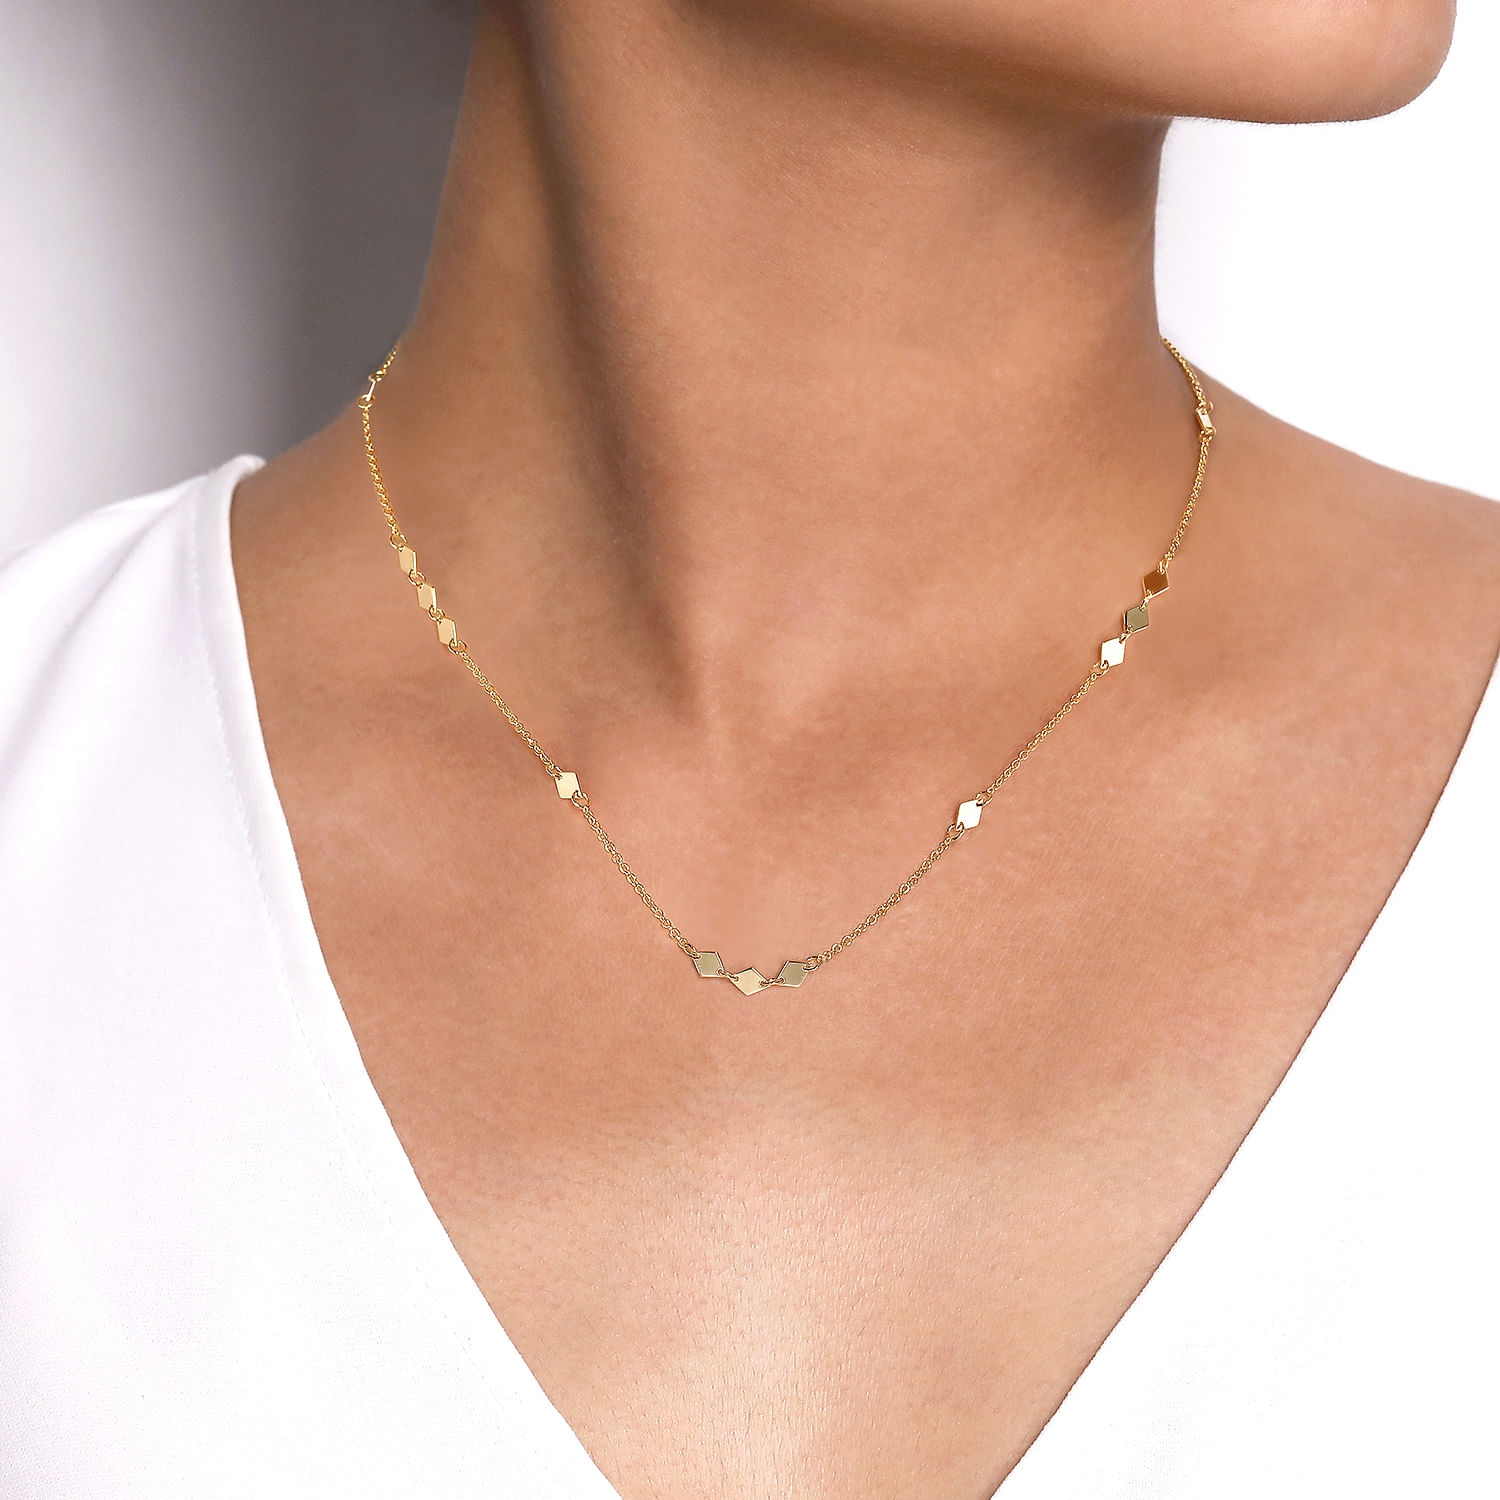 14K Yellow Gold Diamond Shaped Disc Station Necklace